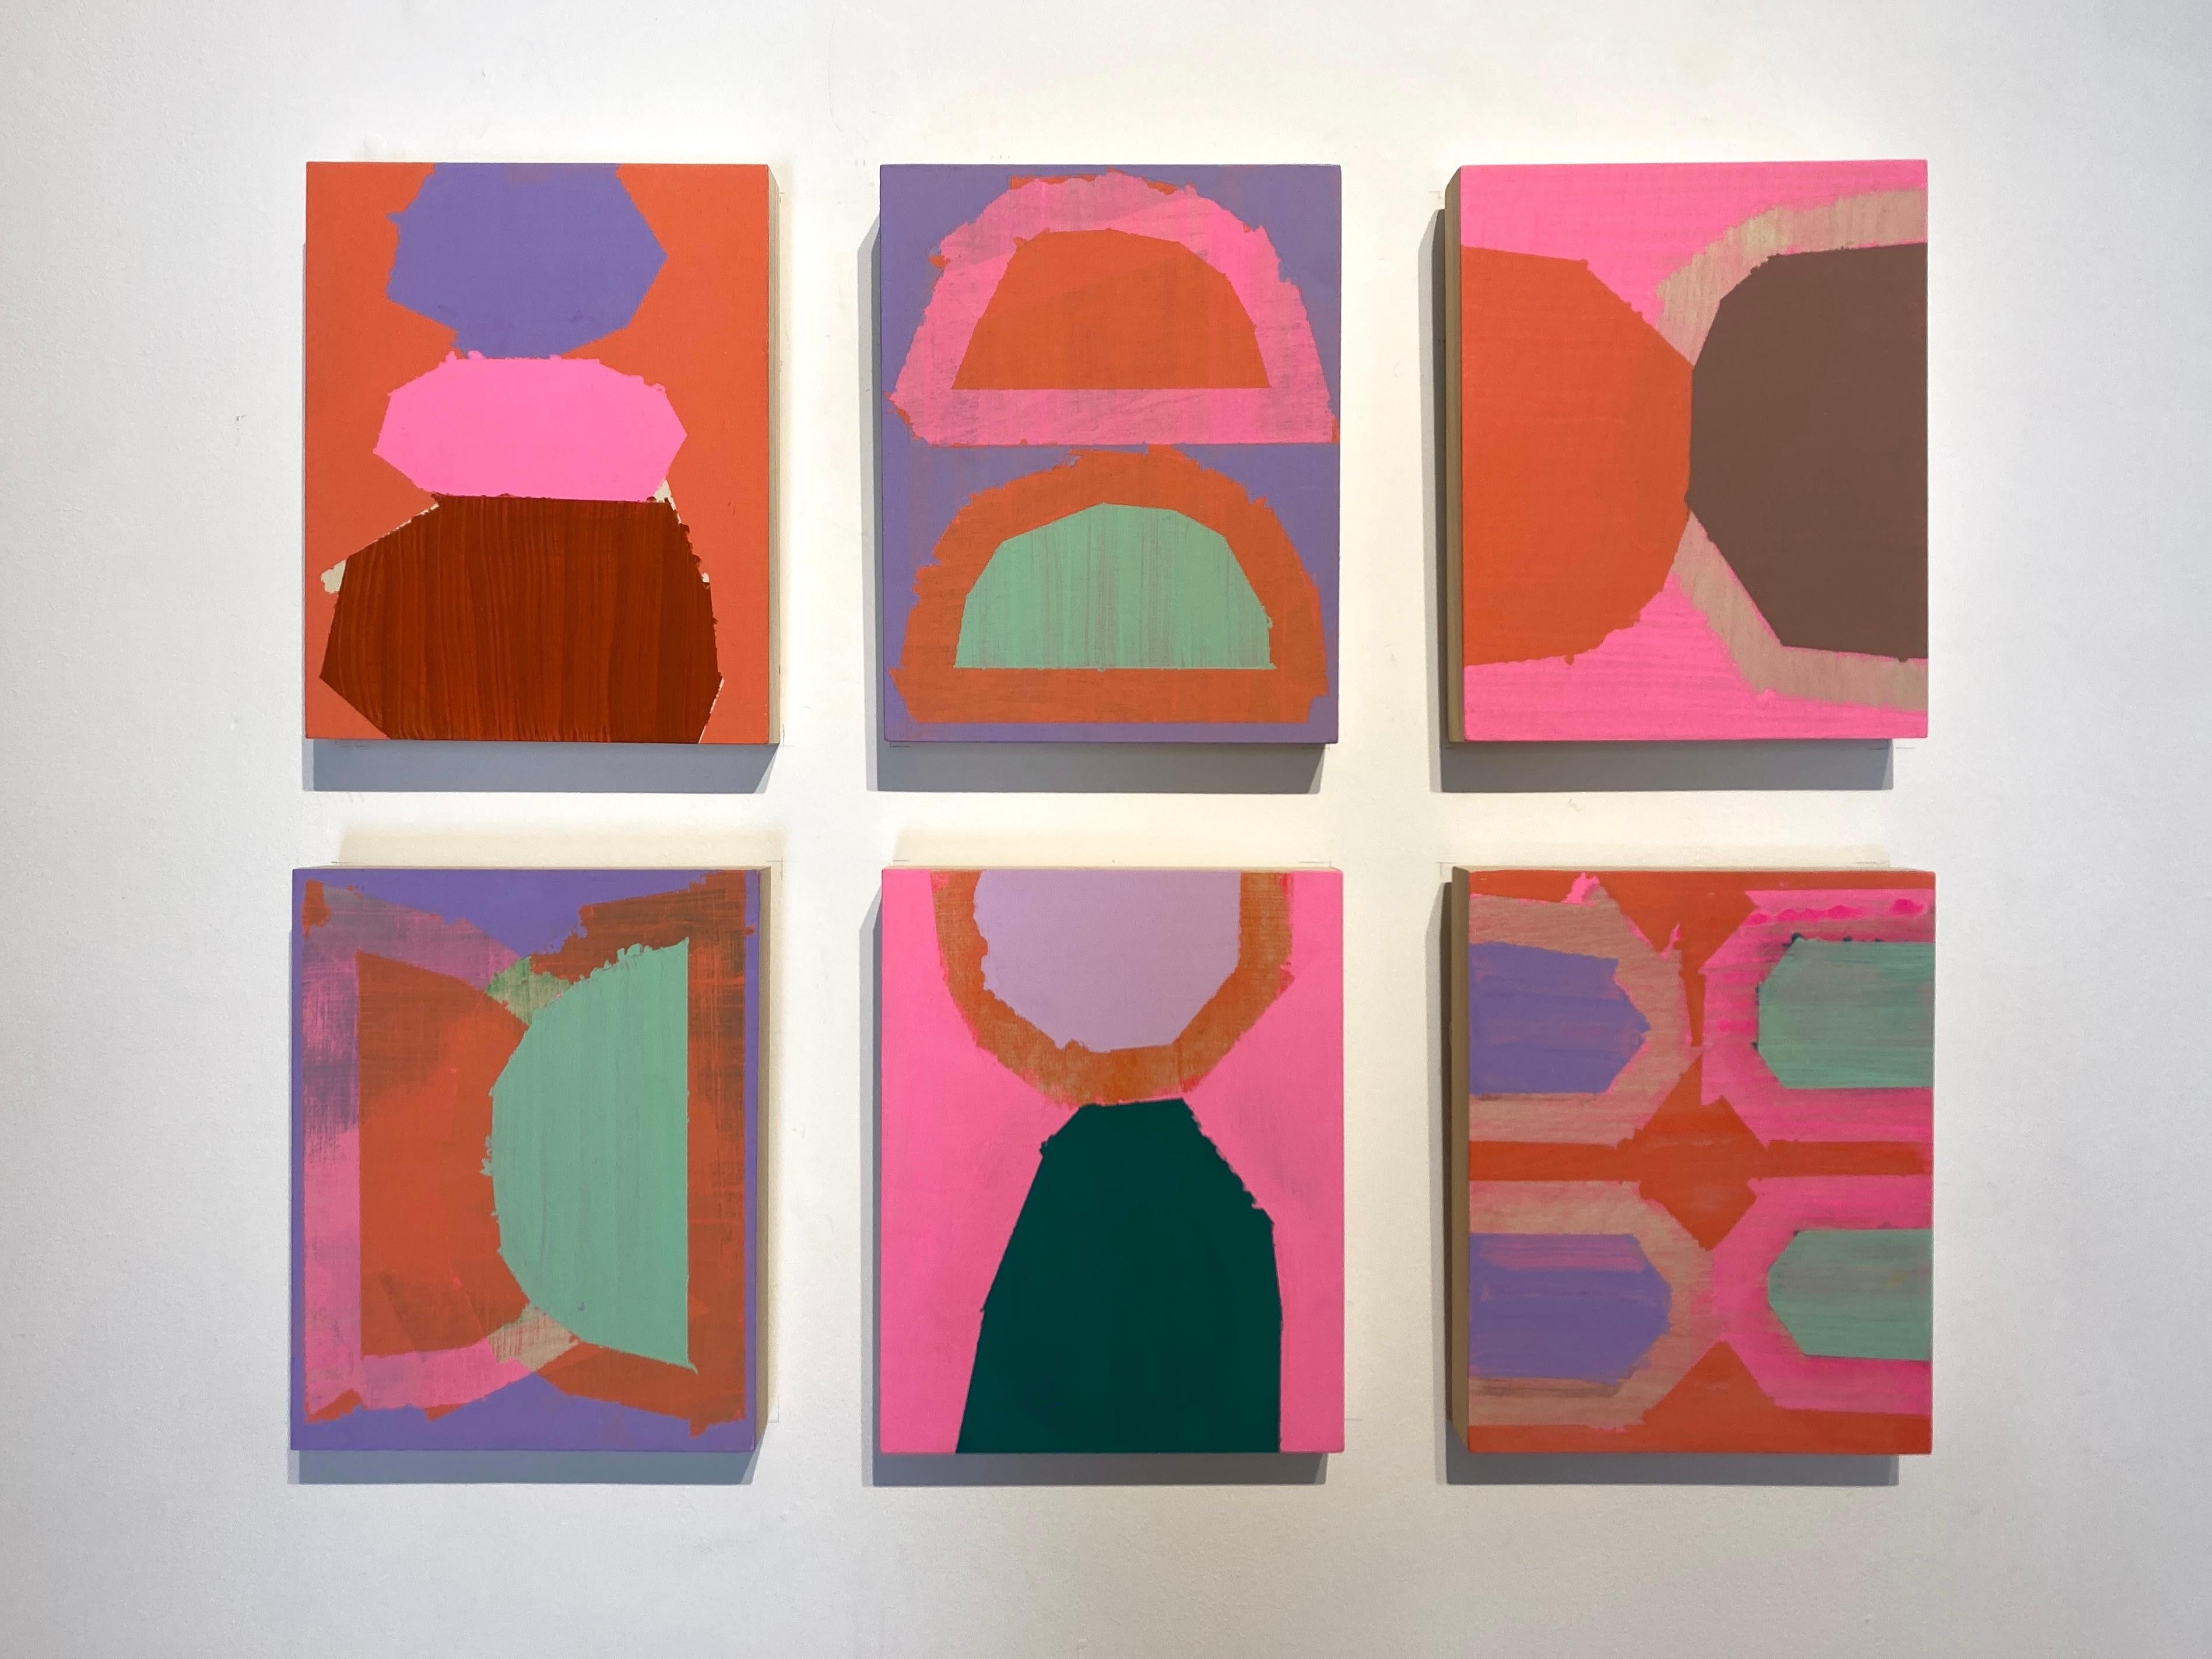 Liz Rundorff Smith renders visual forms that fluctuate between the stability of present-ness and the loss of clarity that is tied to memory. Memory of space is translated through elements of color and line that are constantly in flux, creating forms